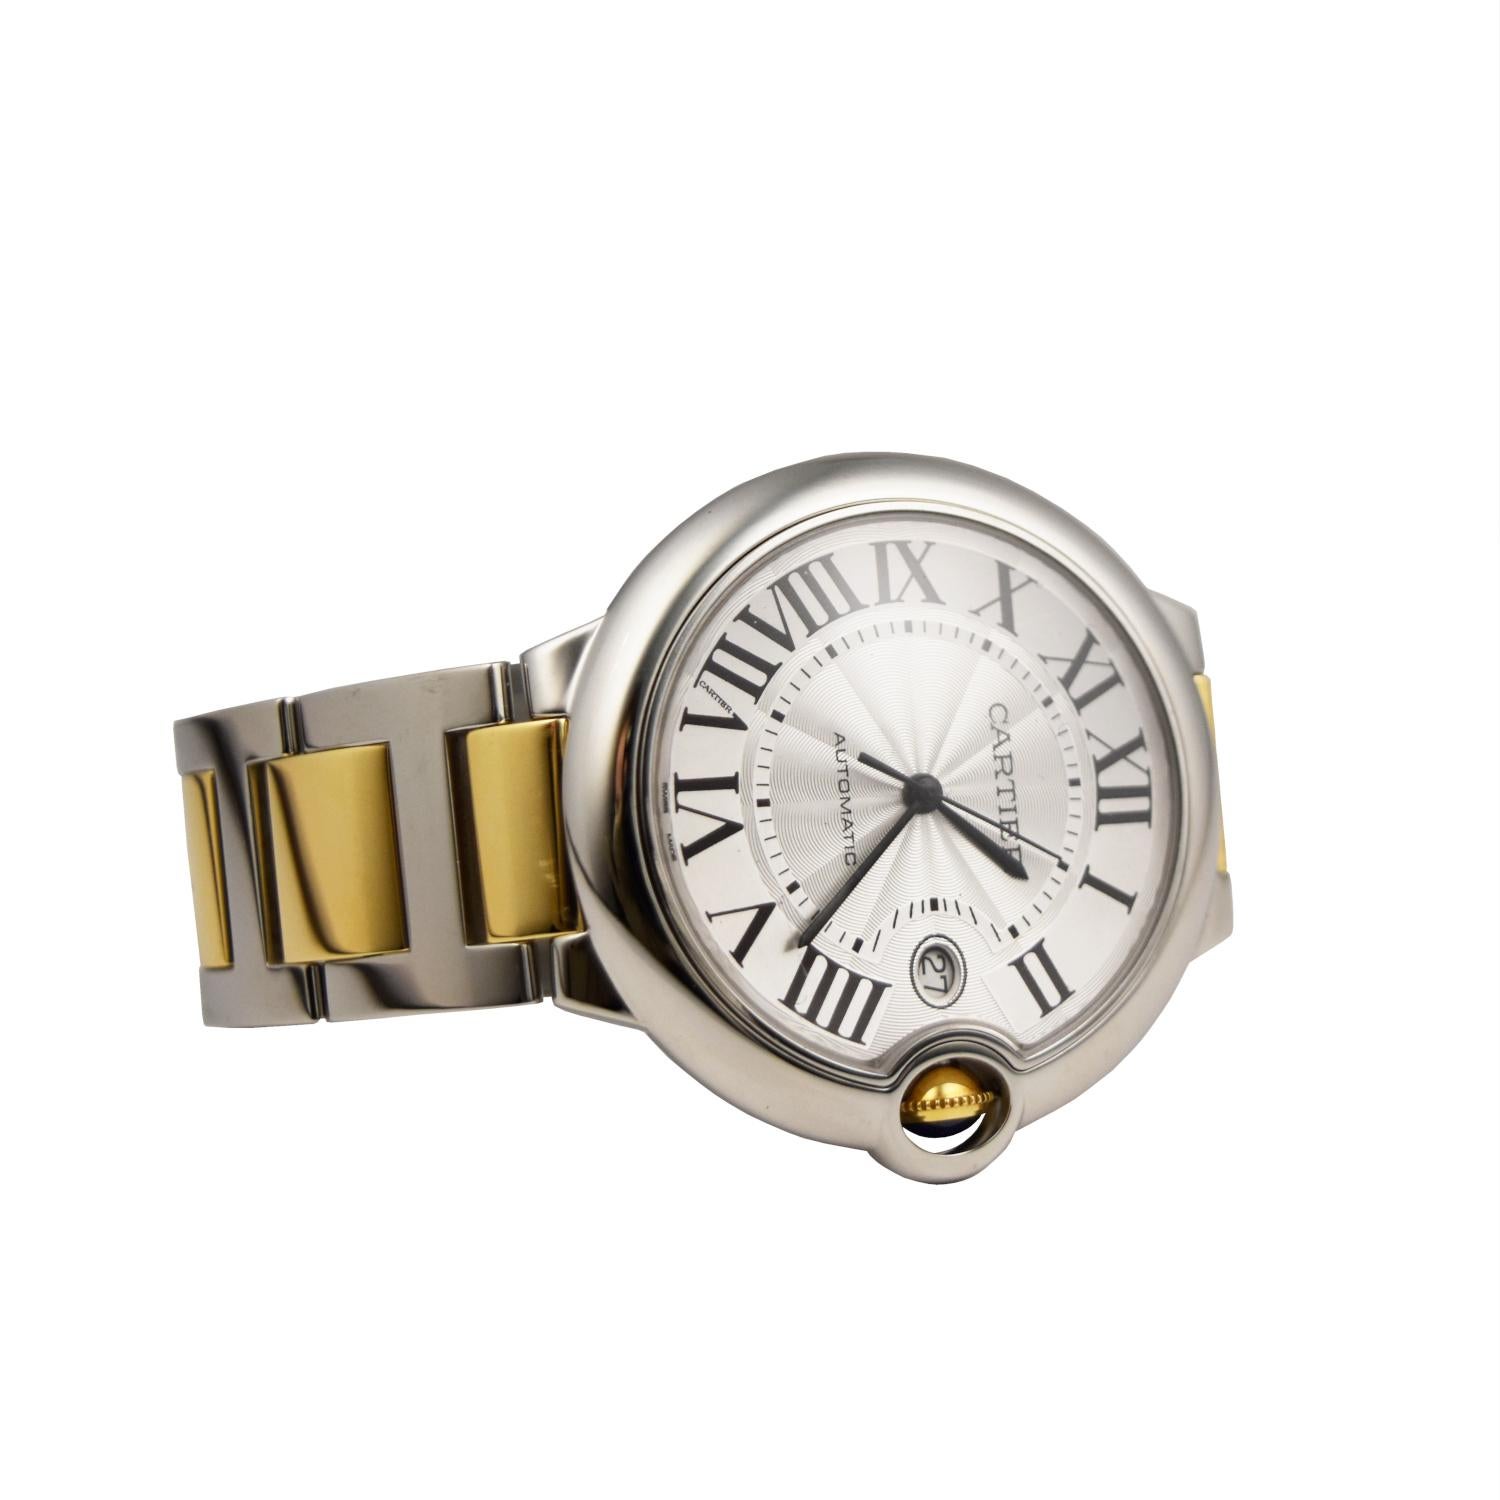 This watch by Cartier quickly became an absolute classic which will sit conformably on your wrist thanks to its ultra smooth convex curved case, this model also displays a solid polished stainless steel  and 18k yellow gold bracelet and its